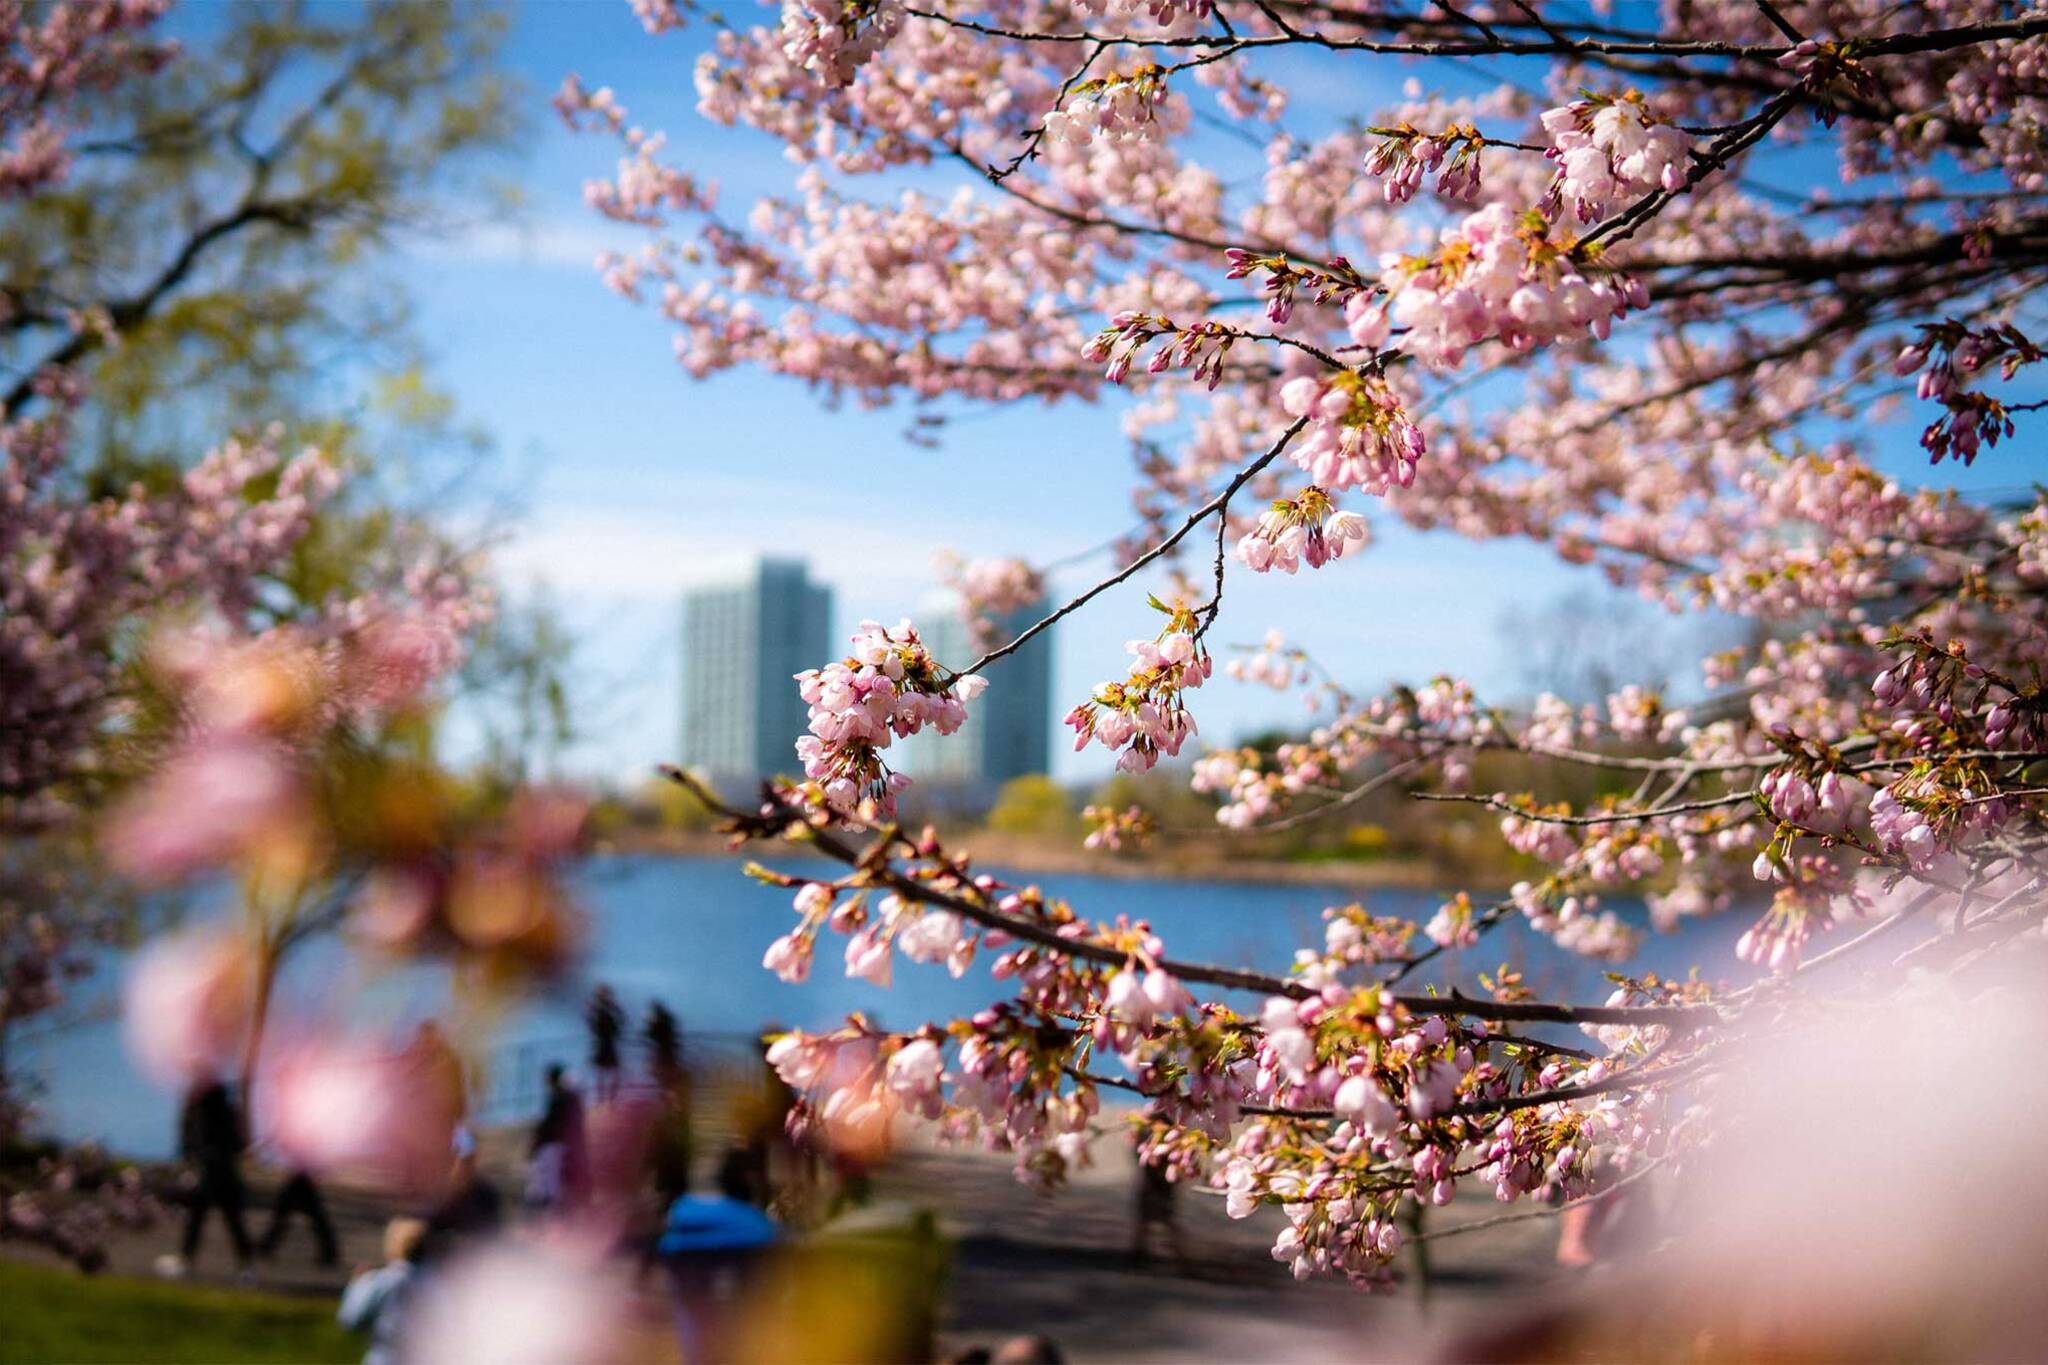 Here's the spring forecast for 2020 in Canada